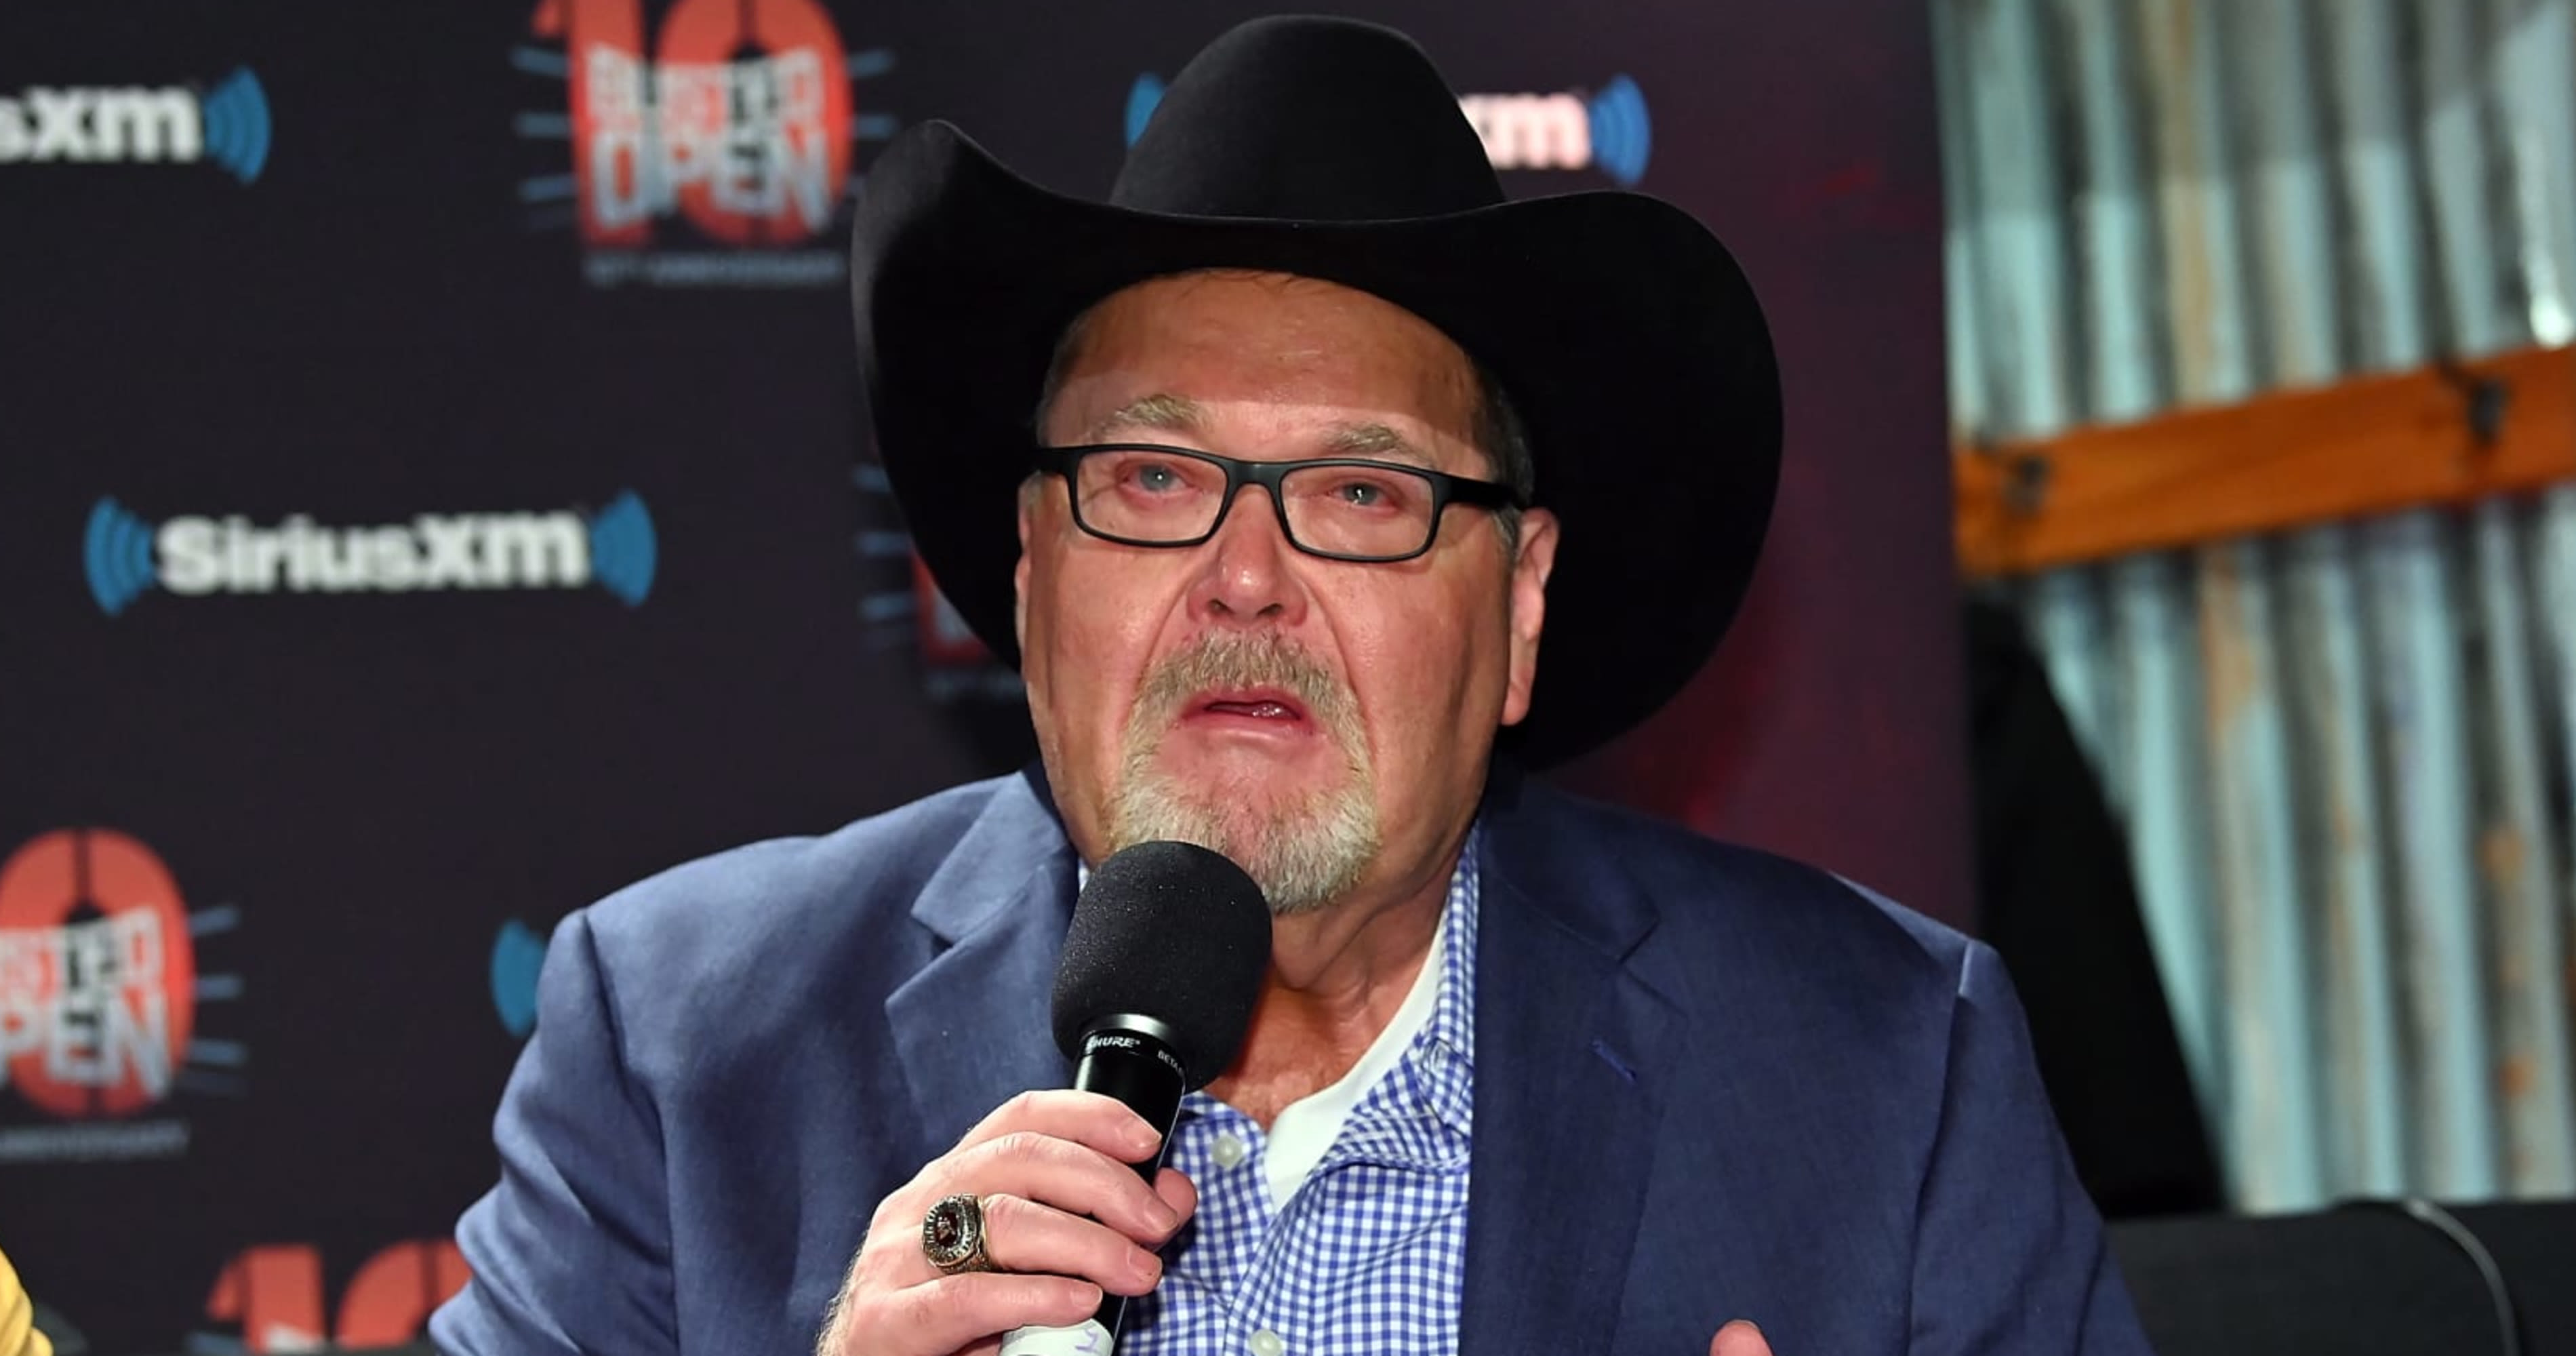 AEW, WWE Legend Jim Ross Says He Was Hospitalized Following 'Shortness of the Breath'